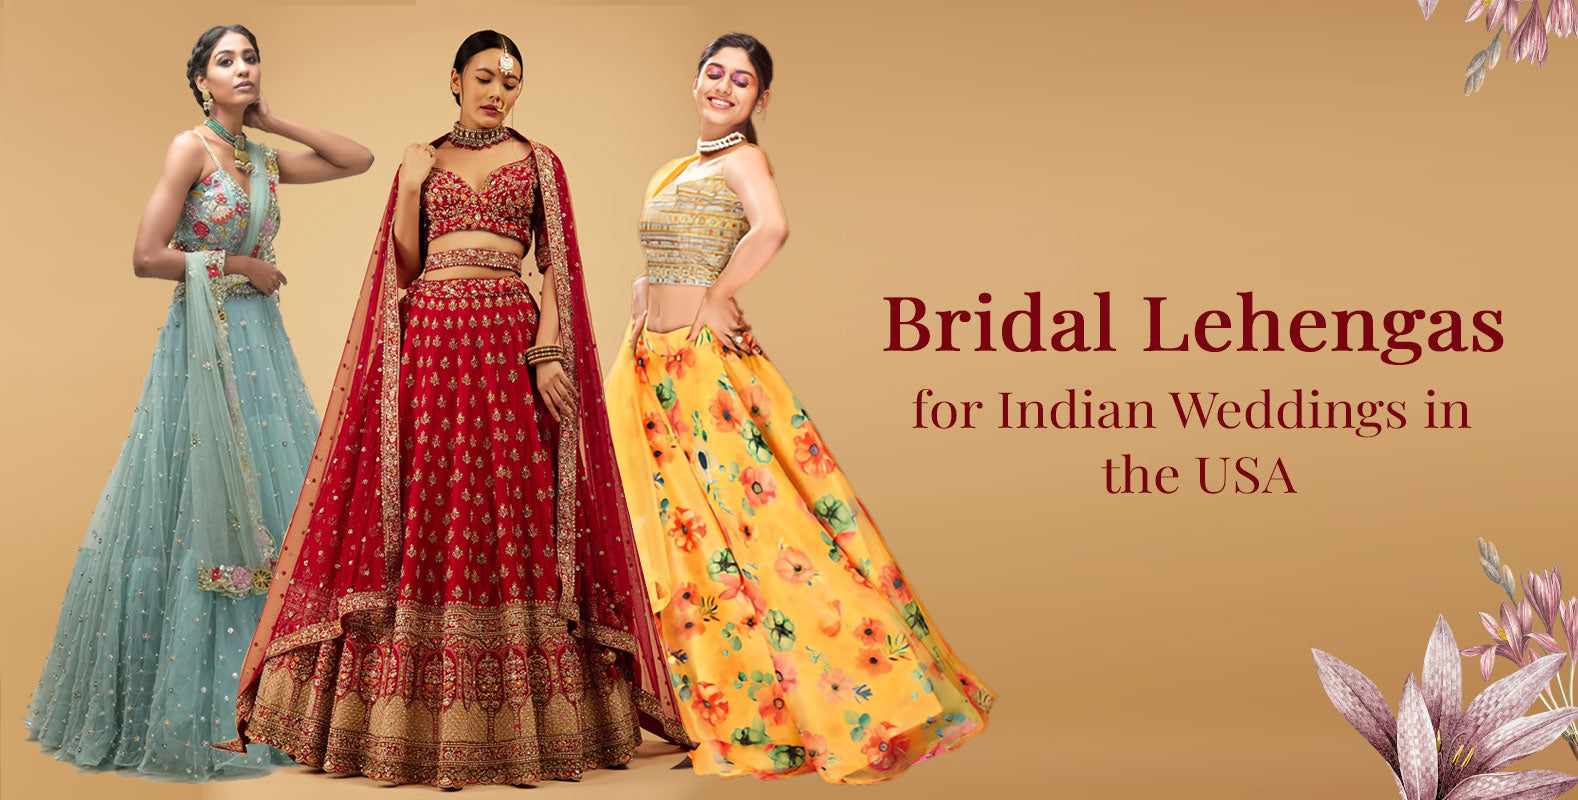 Indian Wedding Lehengas For Different Occasions in the USA